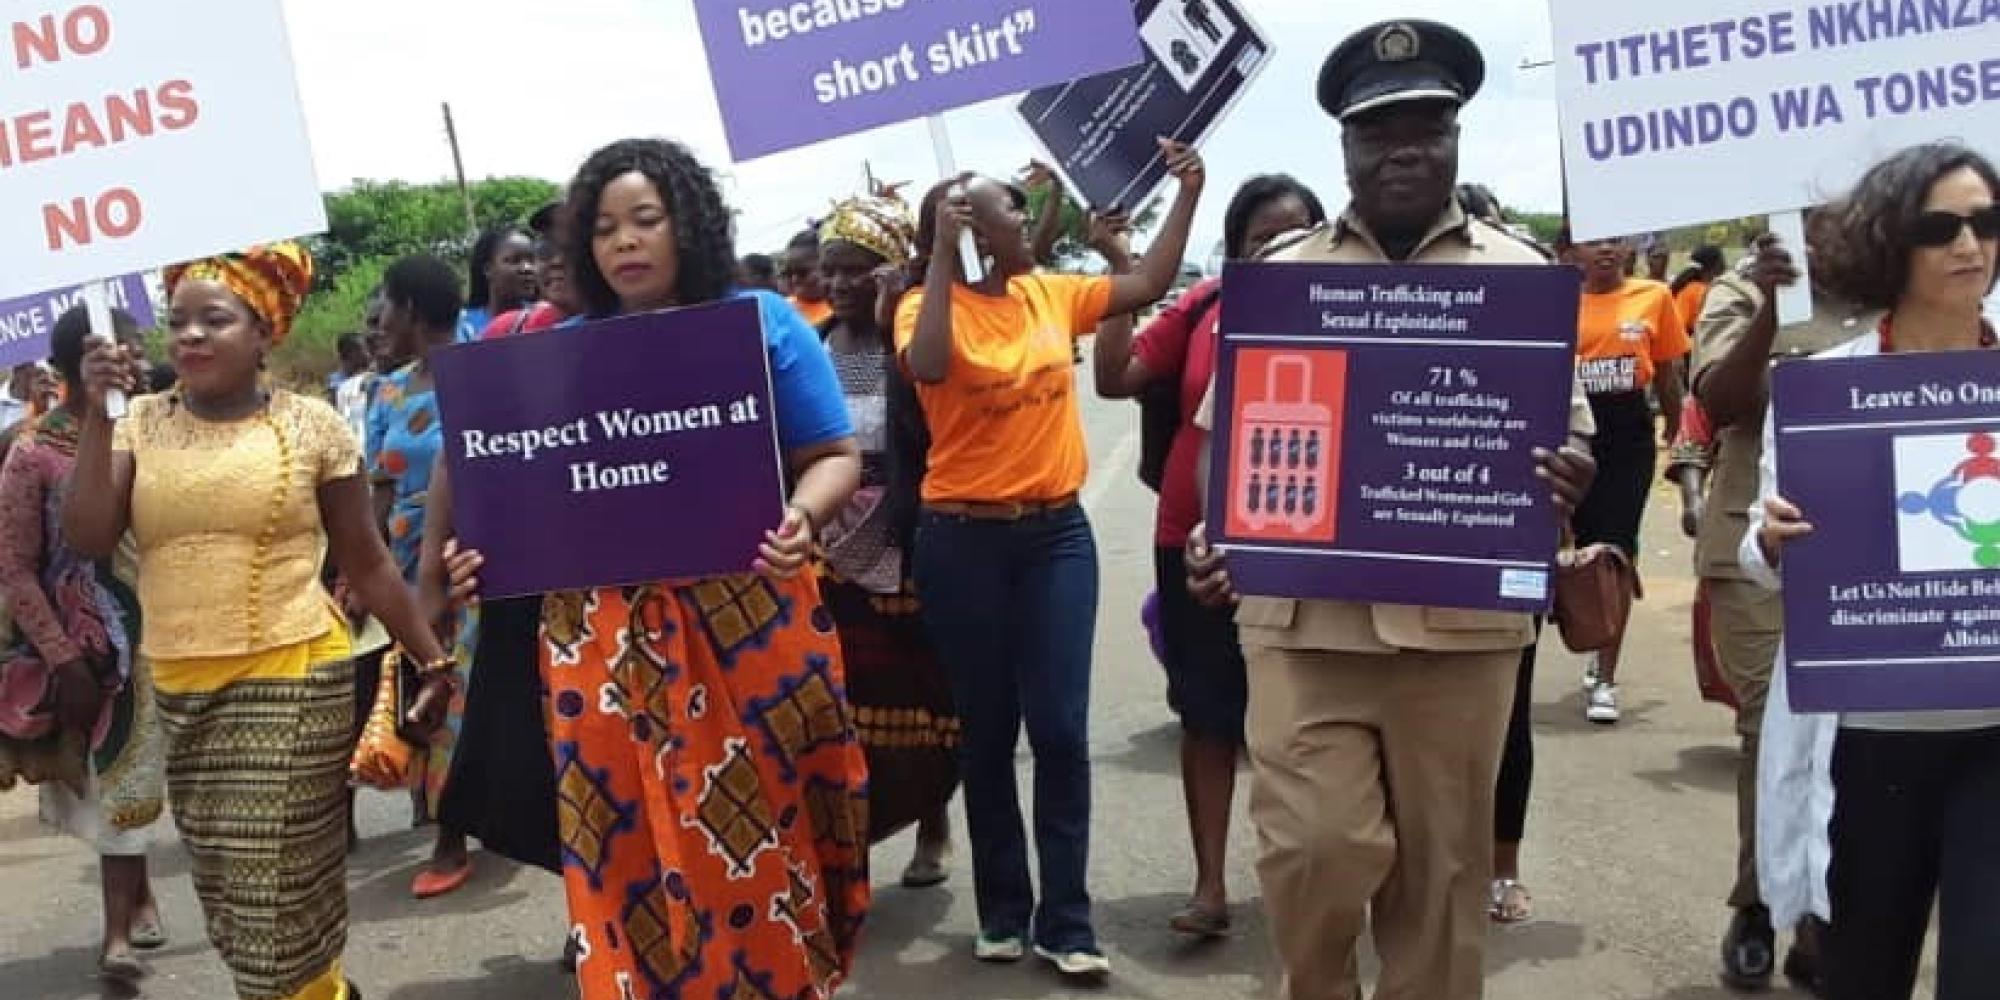 Malawi gender-based violence protest, marching along street with placards